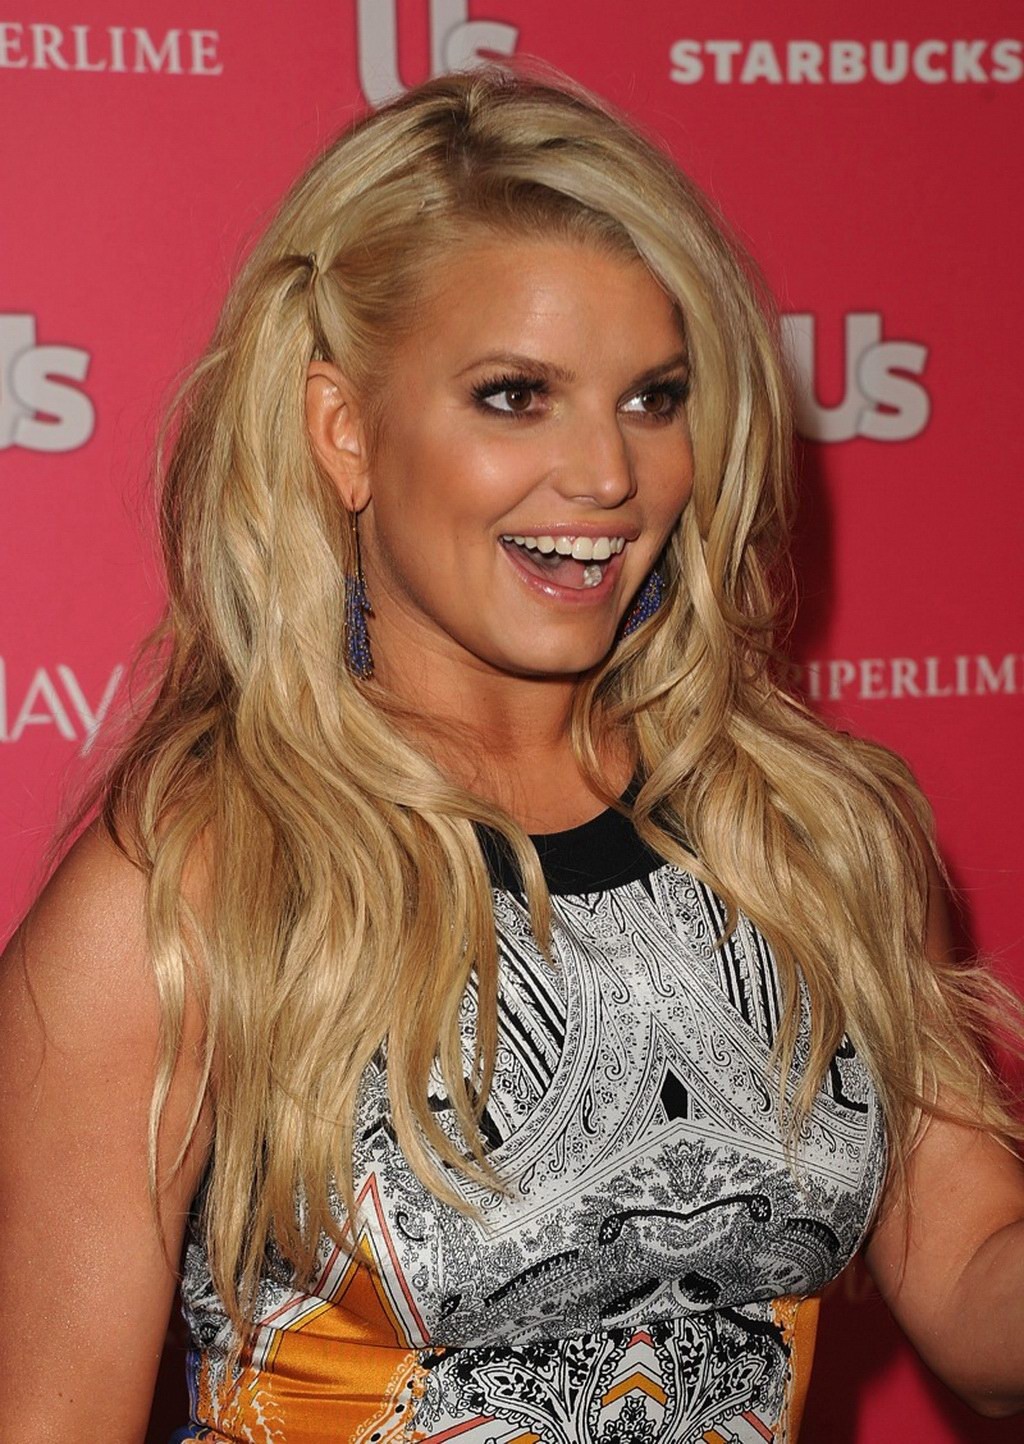 Jessica simpson leggy lingua-teasing all'us weekly's hot hollywood party
 #75306838